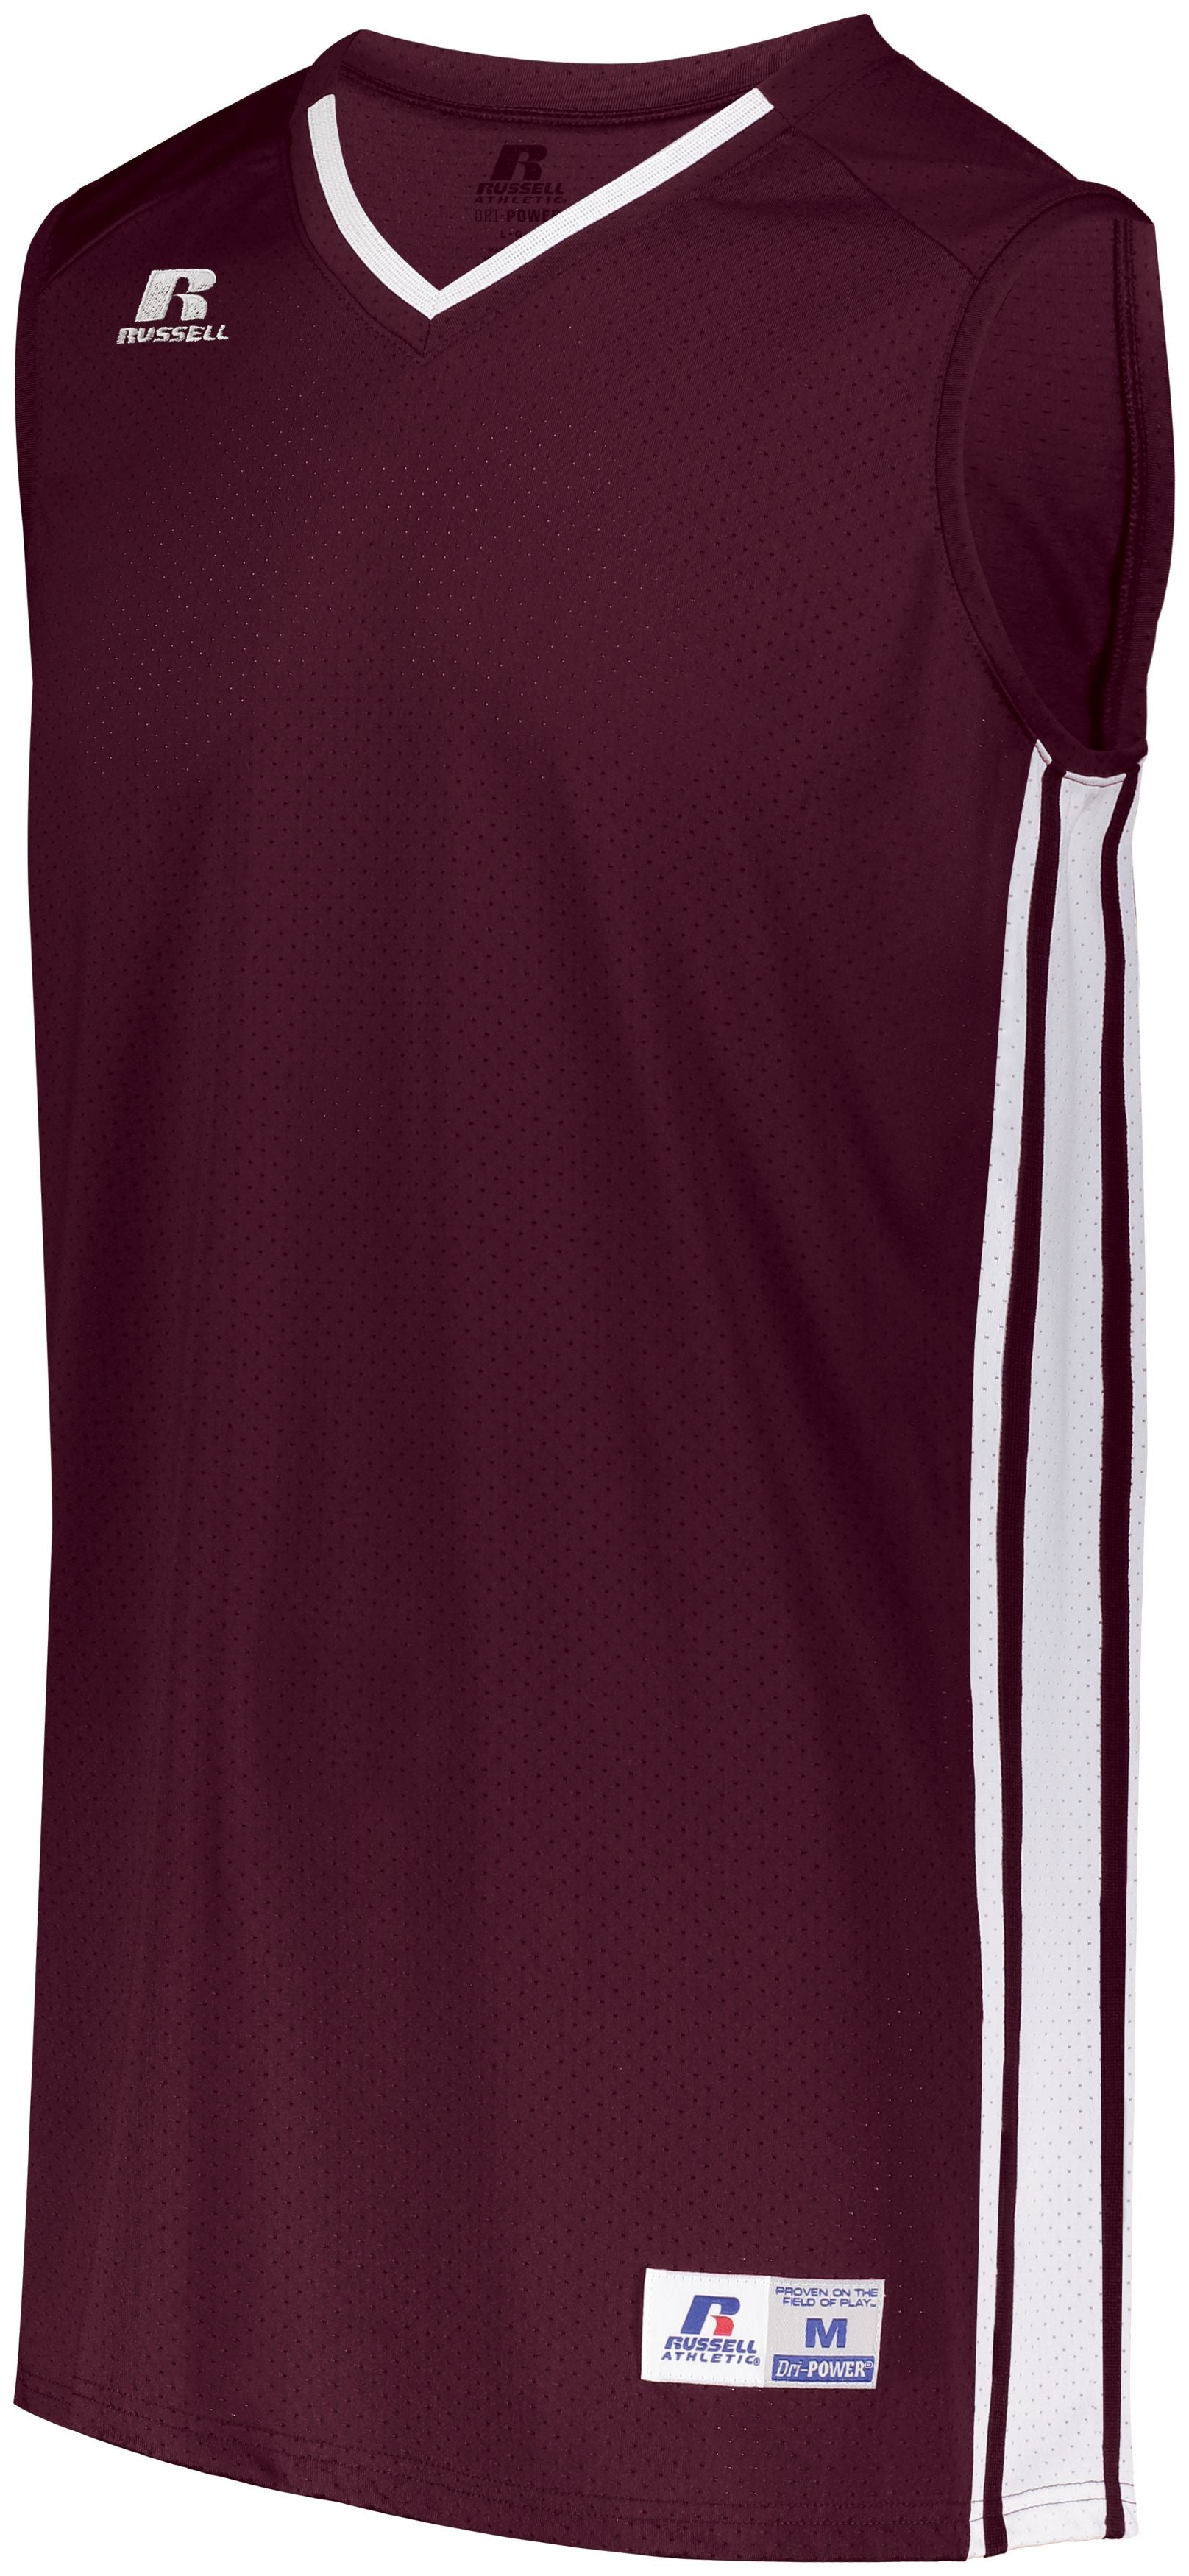 Russell Athletic Legacy Basketball Jersey in Maroon/White  -Part of the Adult, Adult-Jersey, Basketball, Russell-Athletic-Products, Shirts, All-Sports, All-Sports-1 product lines at KanaleyCreations.com